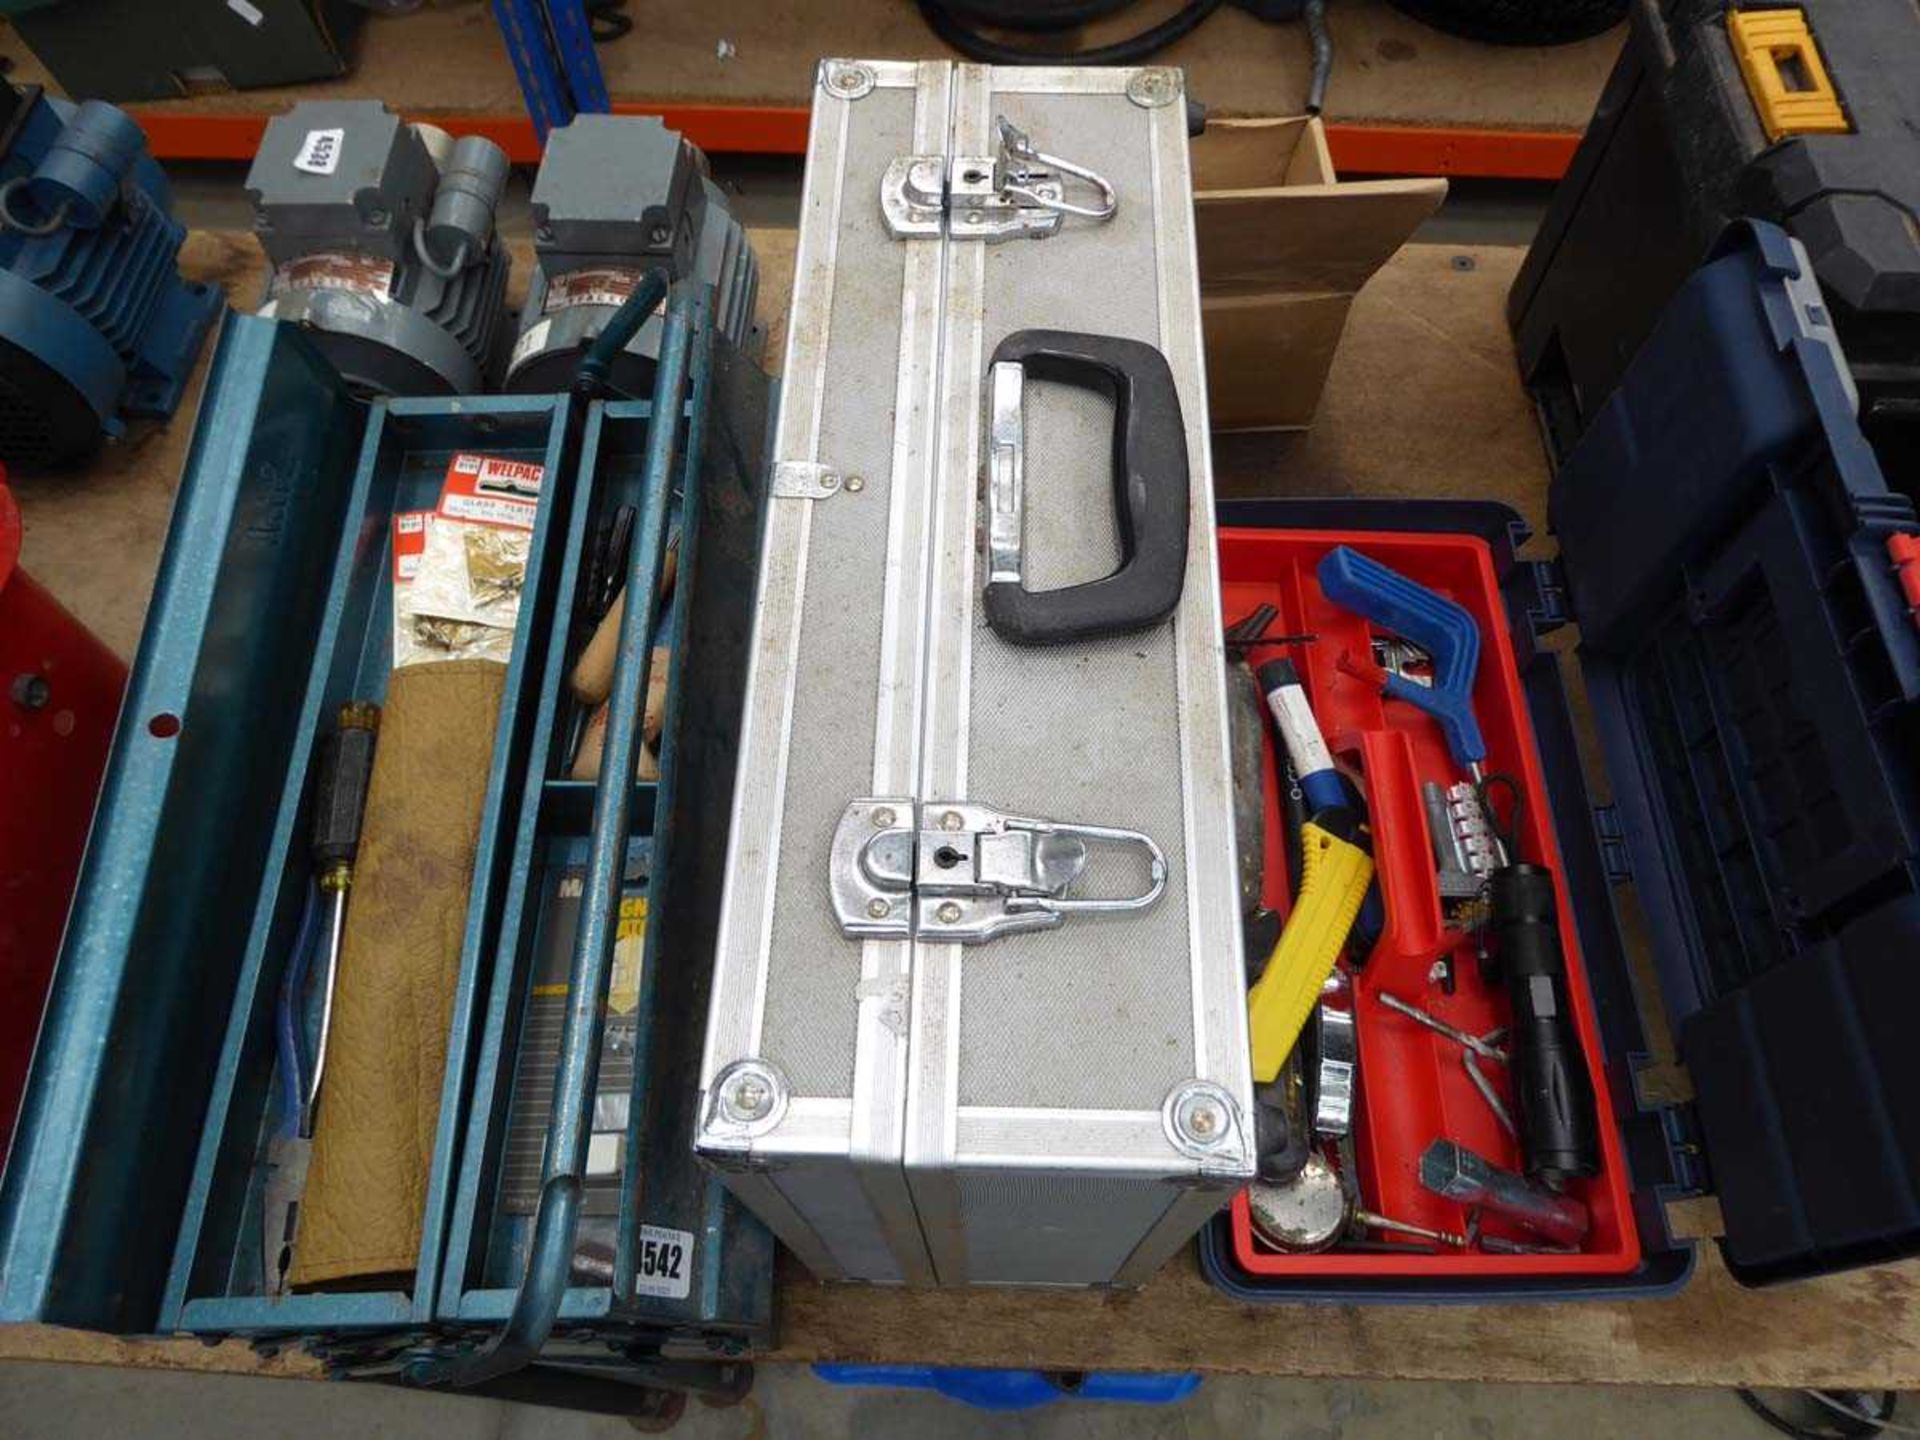 3 assorted toolboxes containing various small tools